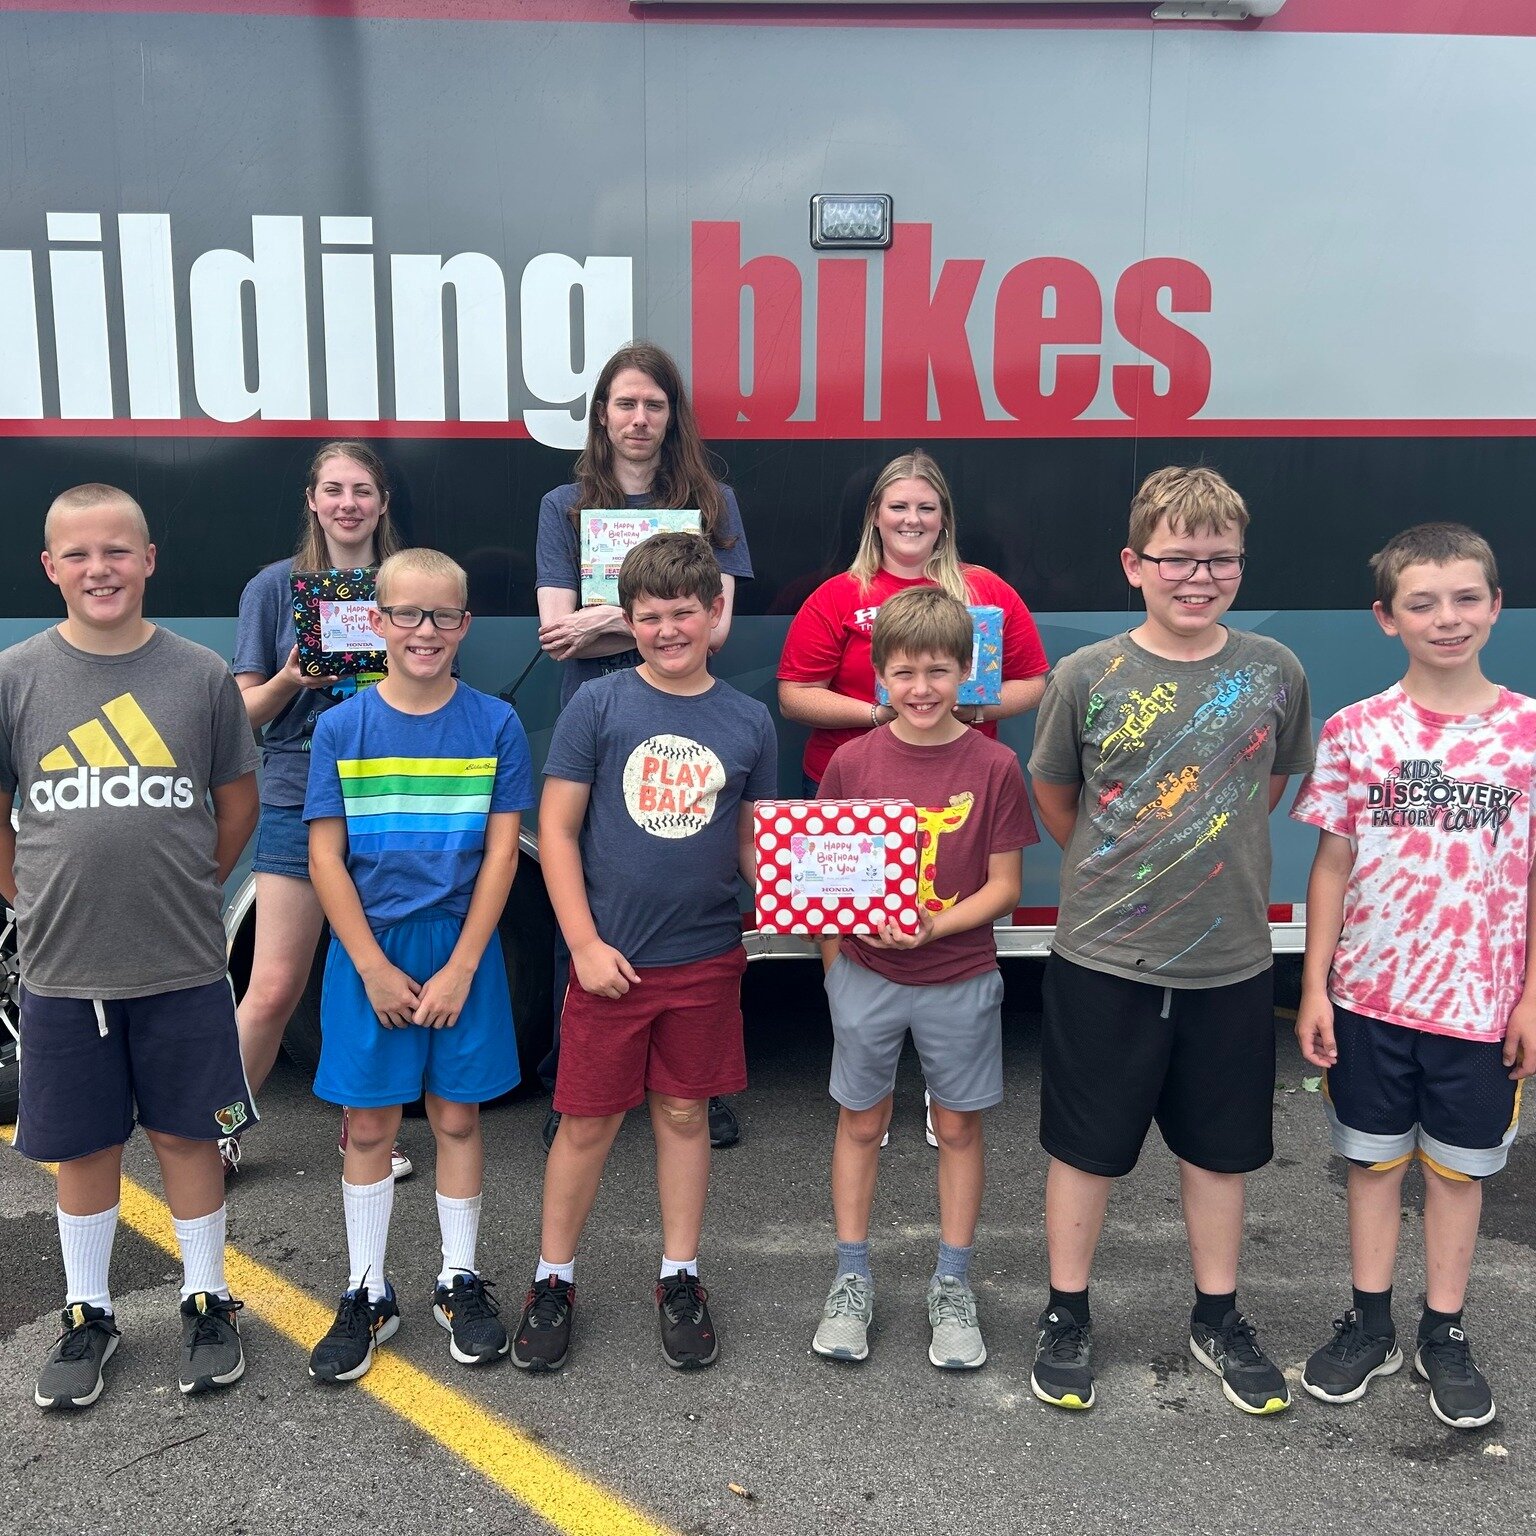 Did you know that it is 20 times cheaper to maintain a bike than it is a car? Campers in the July Session of #KidsBuildingBikesCamp with @nine13sports joined the ranks of previous campers as they learned the techniques of bicycle maintenance includin